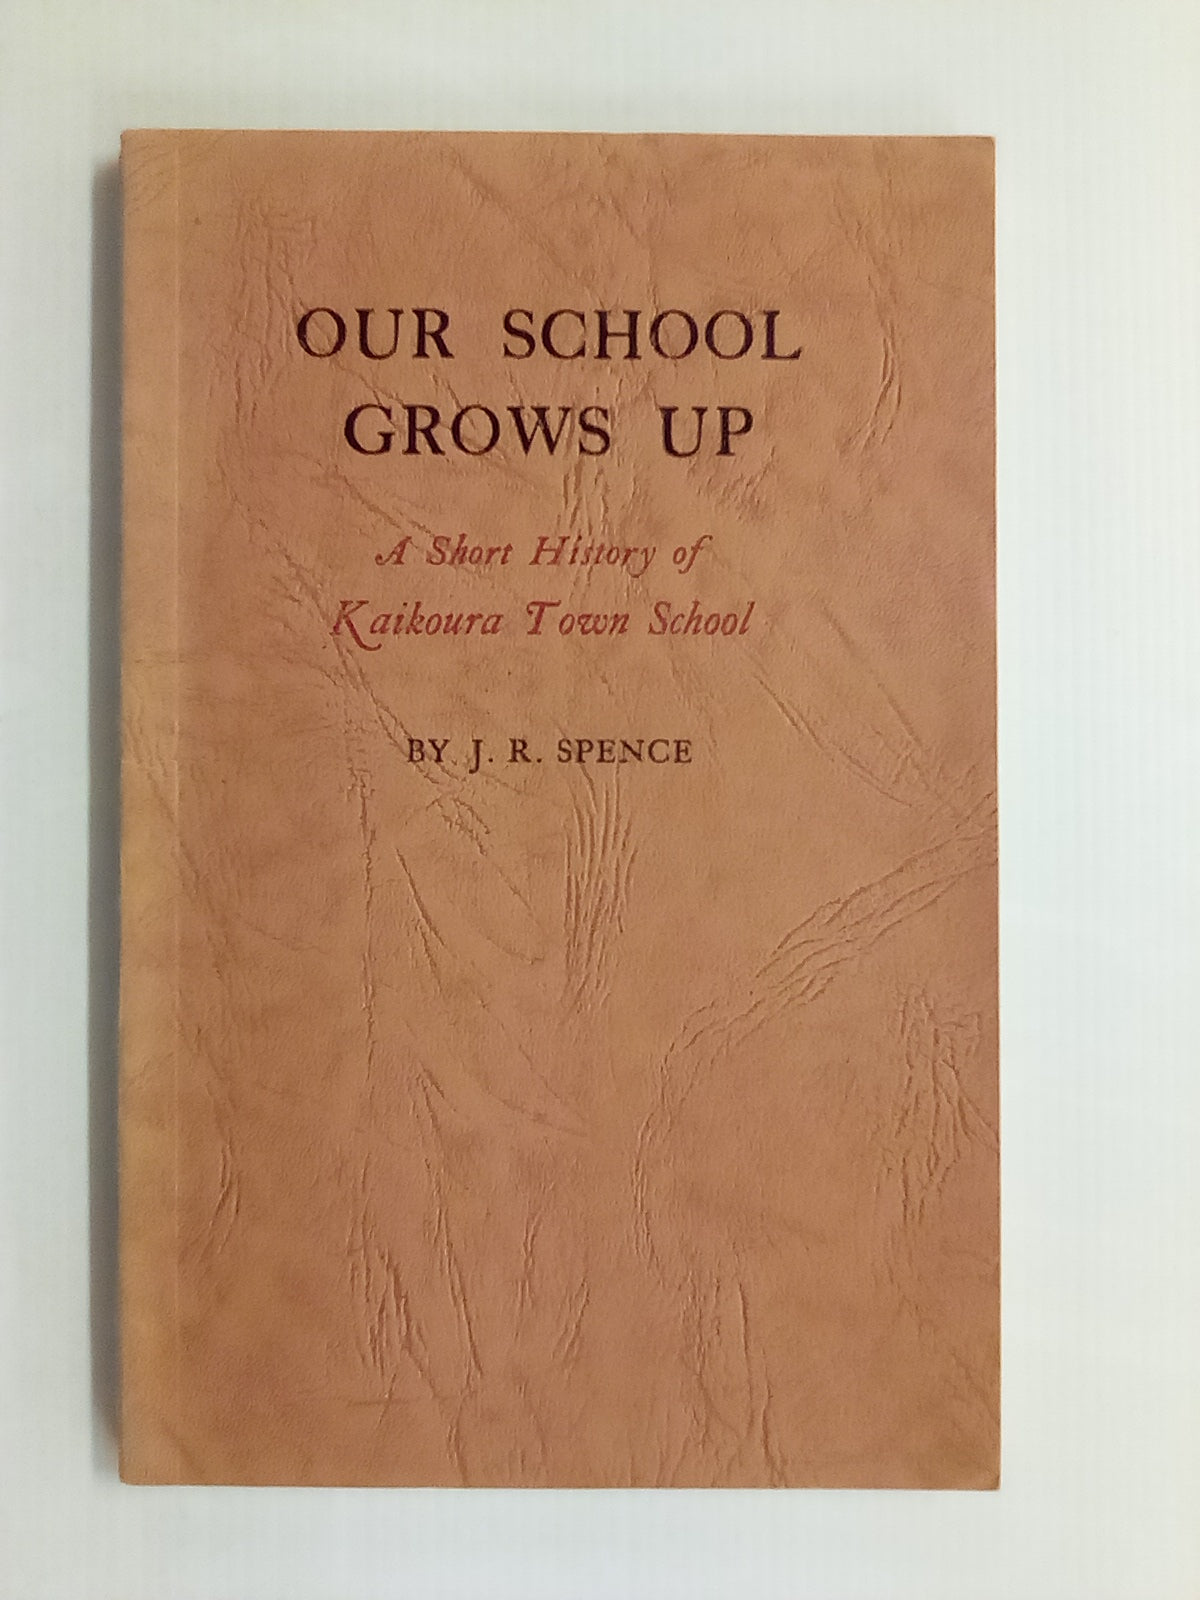 Our School Grows Up - History of the Kaikoura Town School